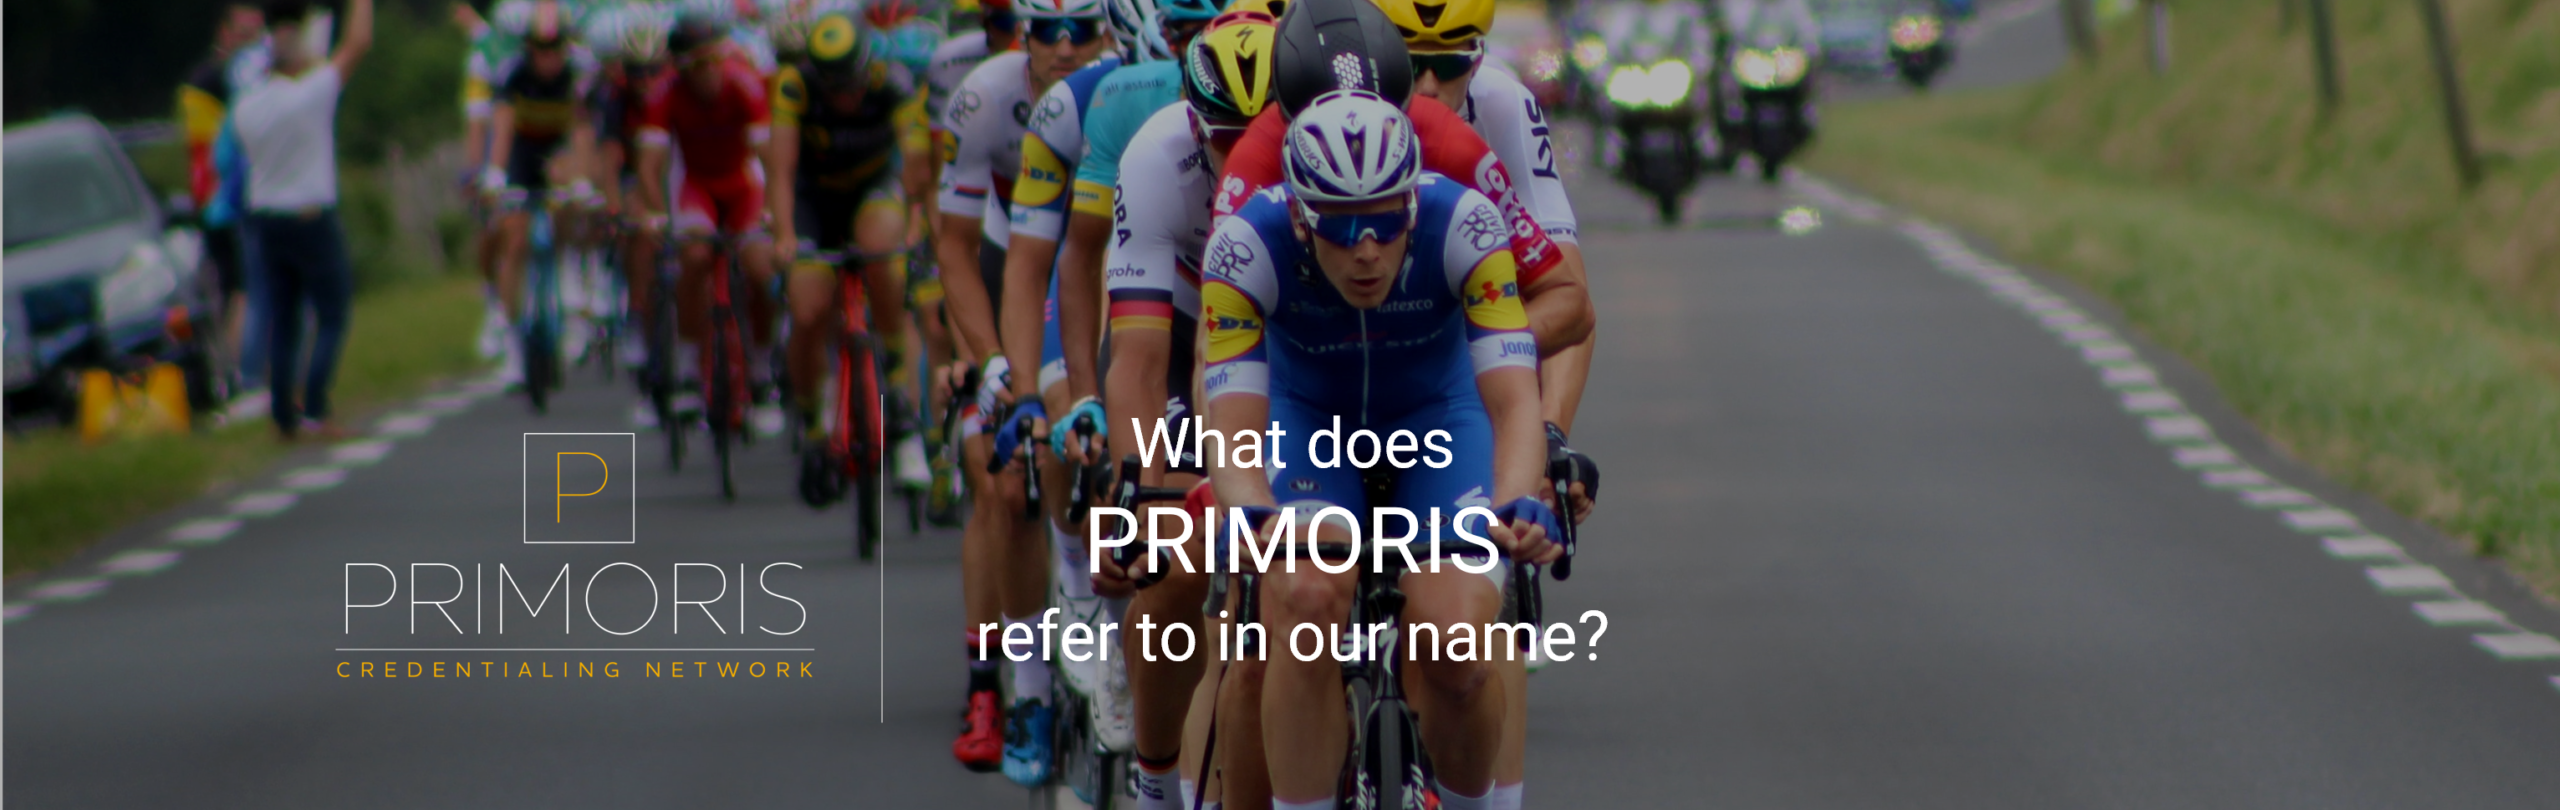 What does PRIMORIS mean in our name, Primoris Credentialing Network?